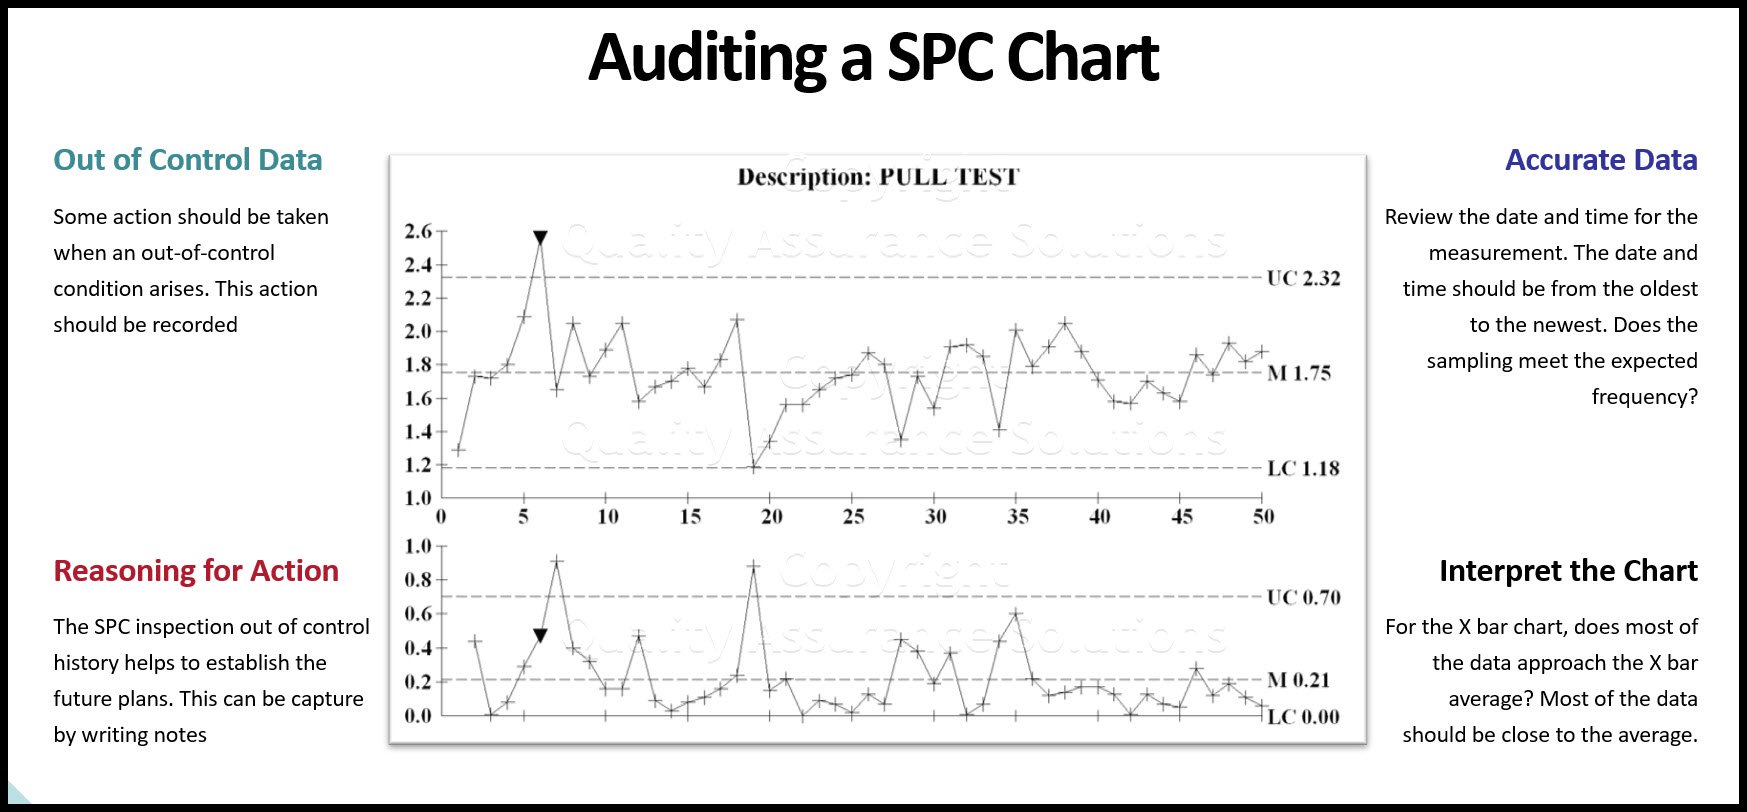 Learn to audit your SPC inspection program. This article covers SPC technology keys such as documentation, training, reviewing, and process improvement. 